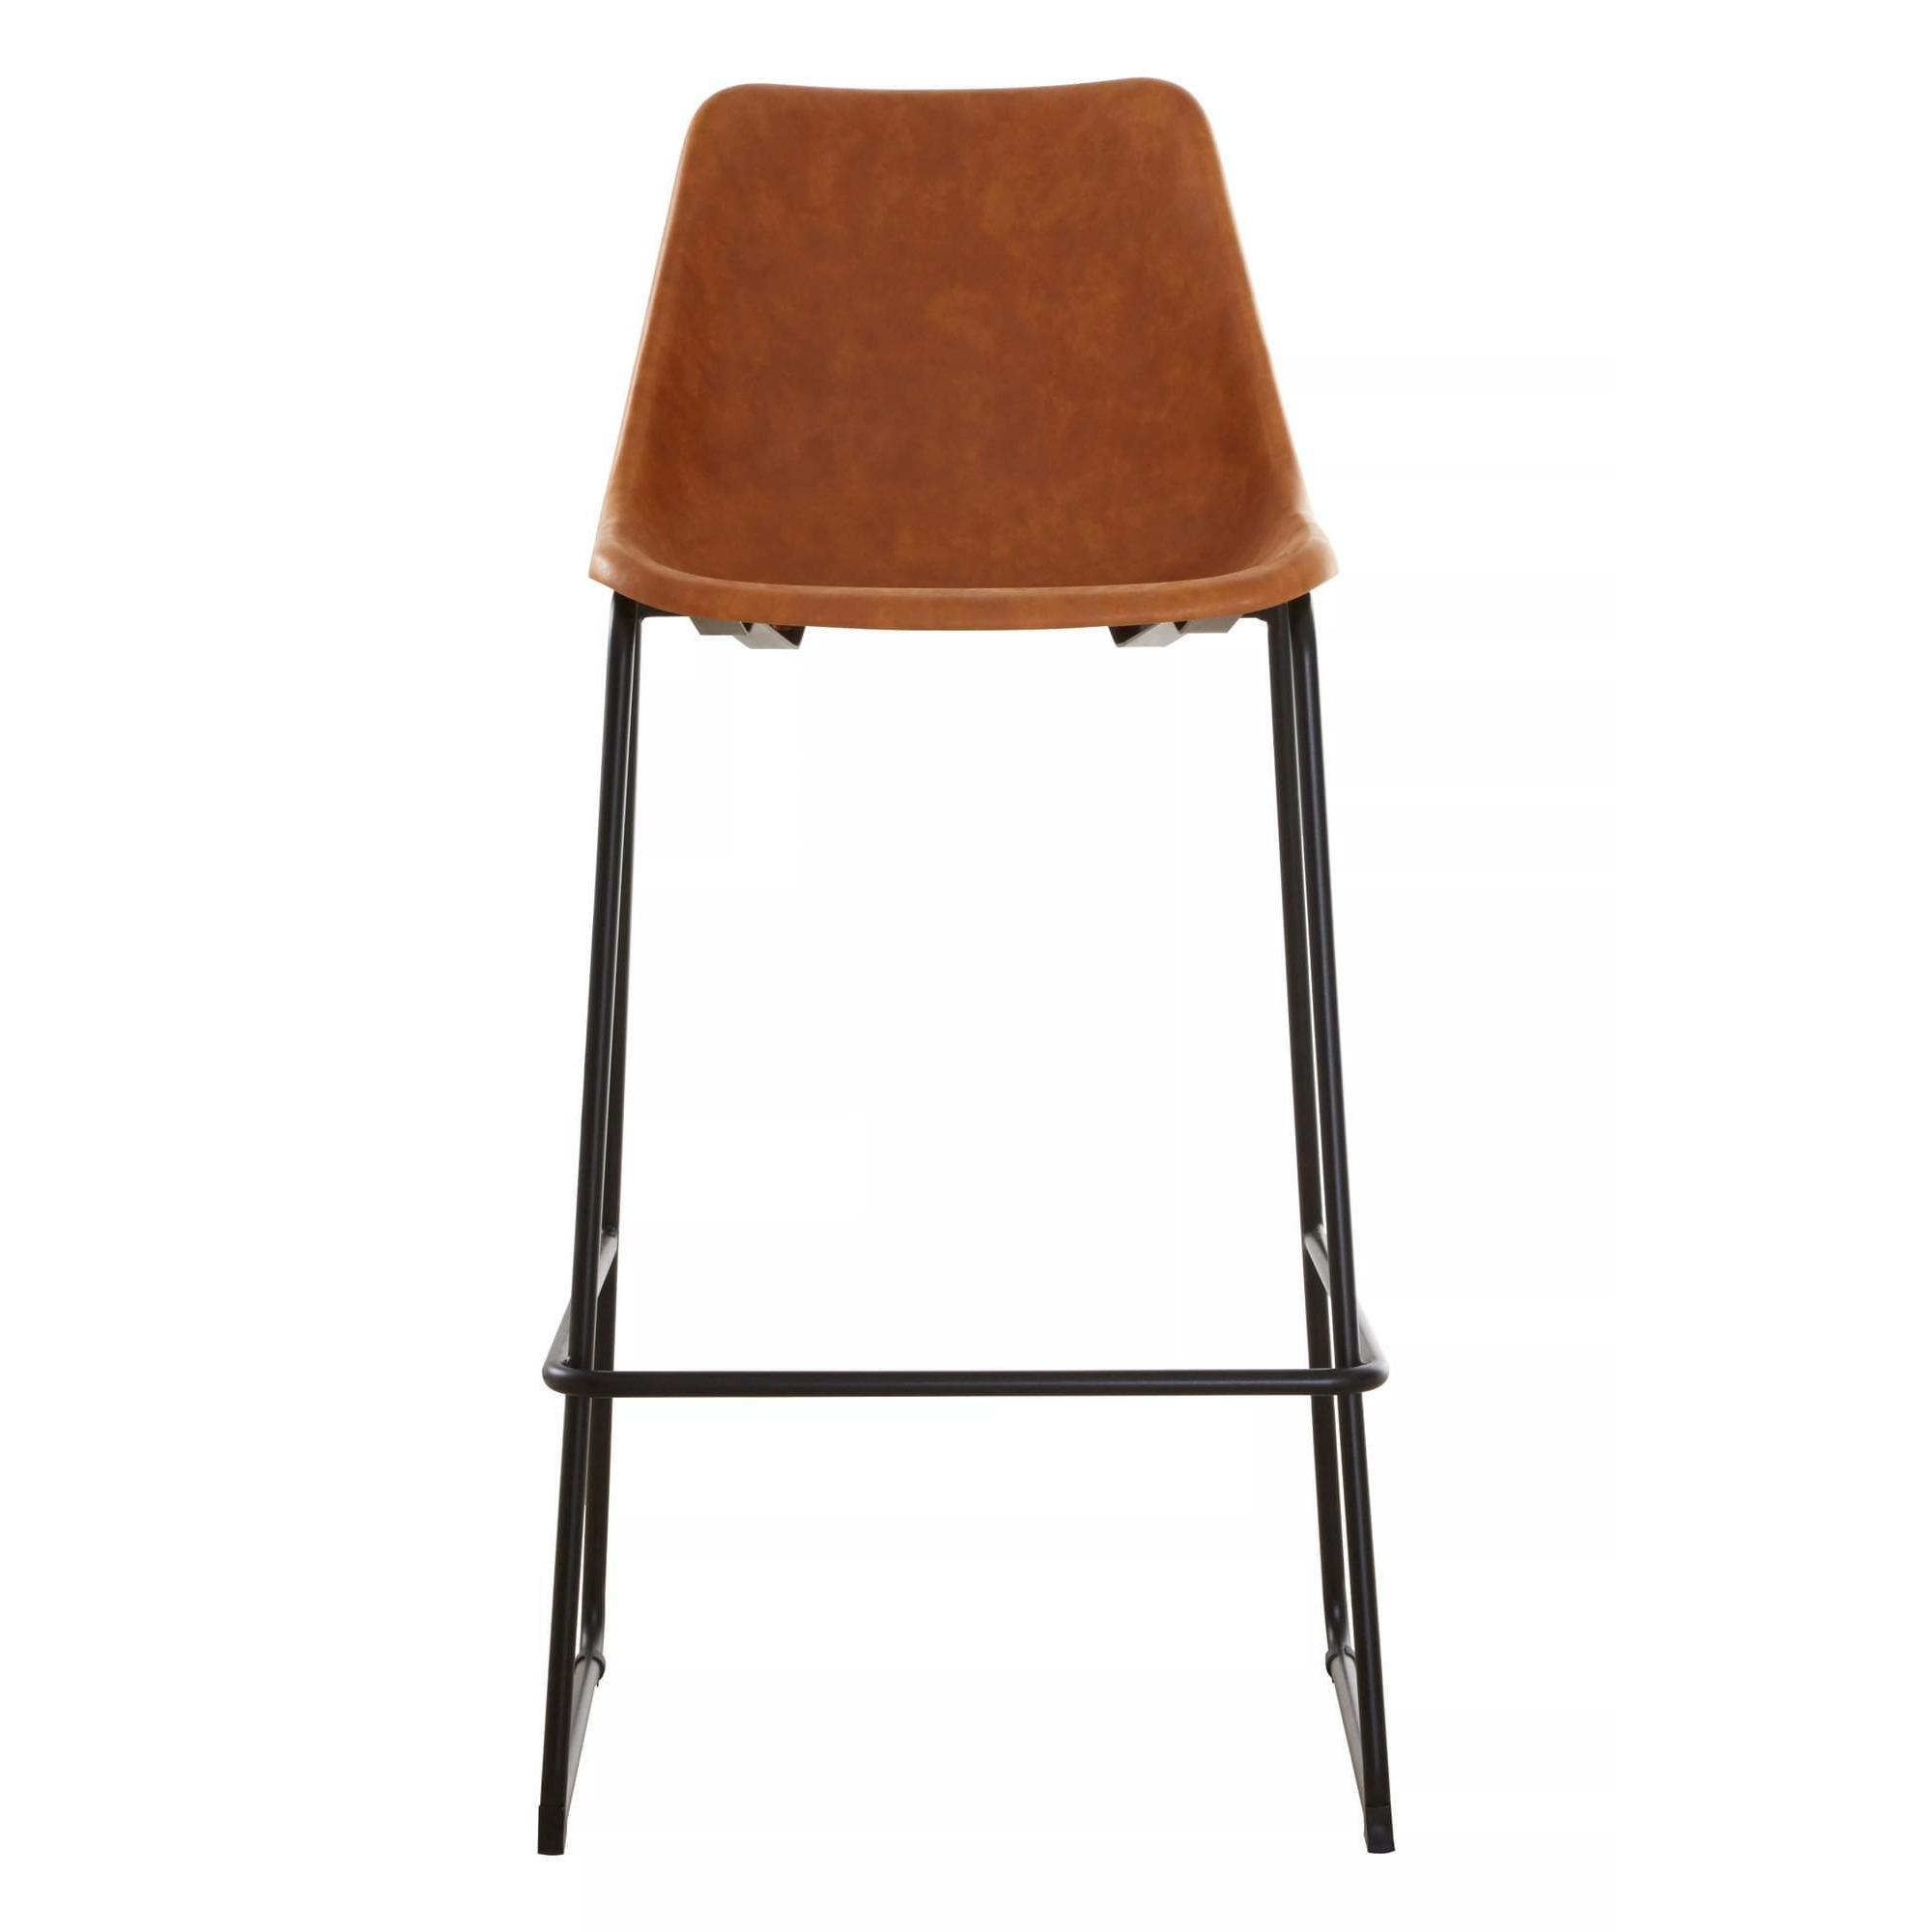 Interiors by Premier Dalston Bar Stool with Angled Legs - image 1